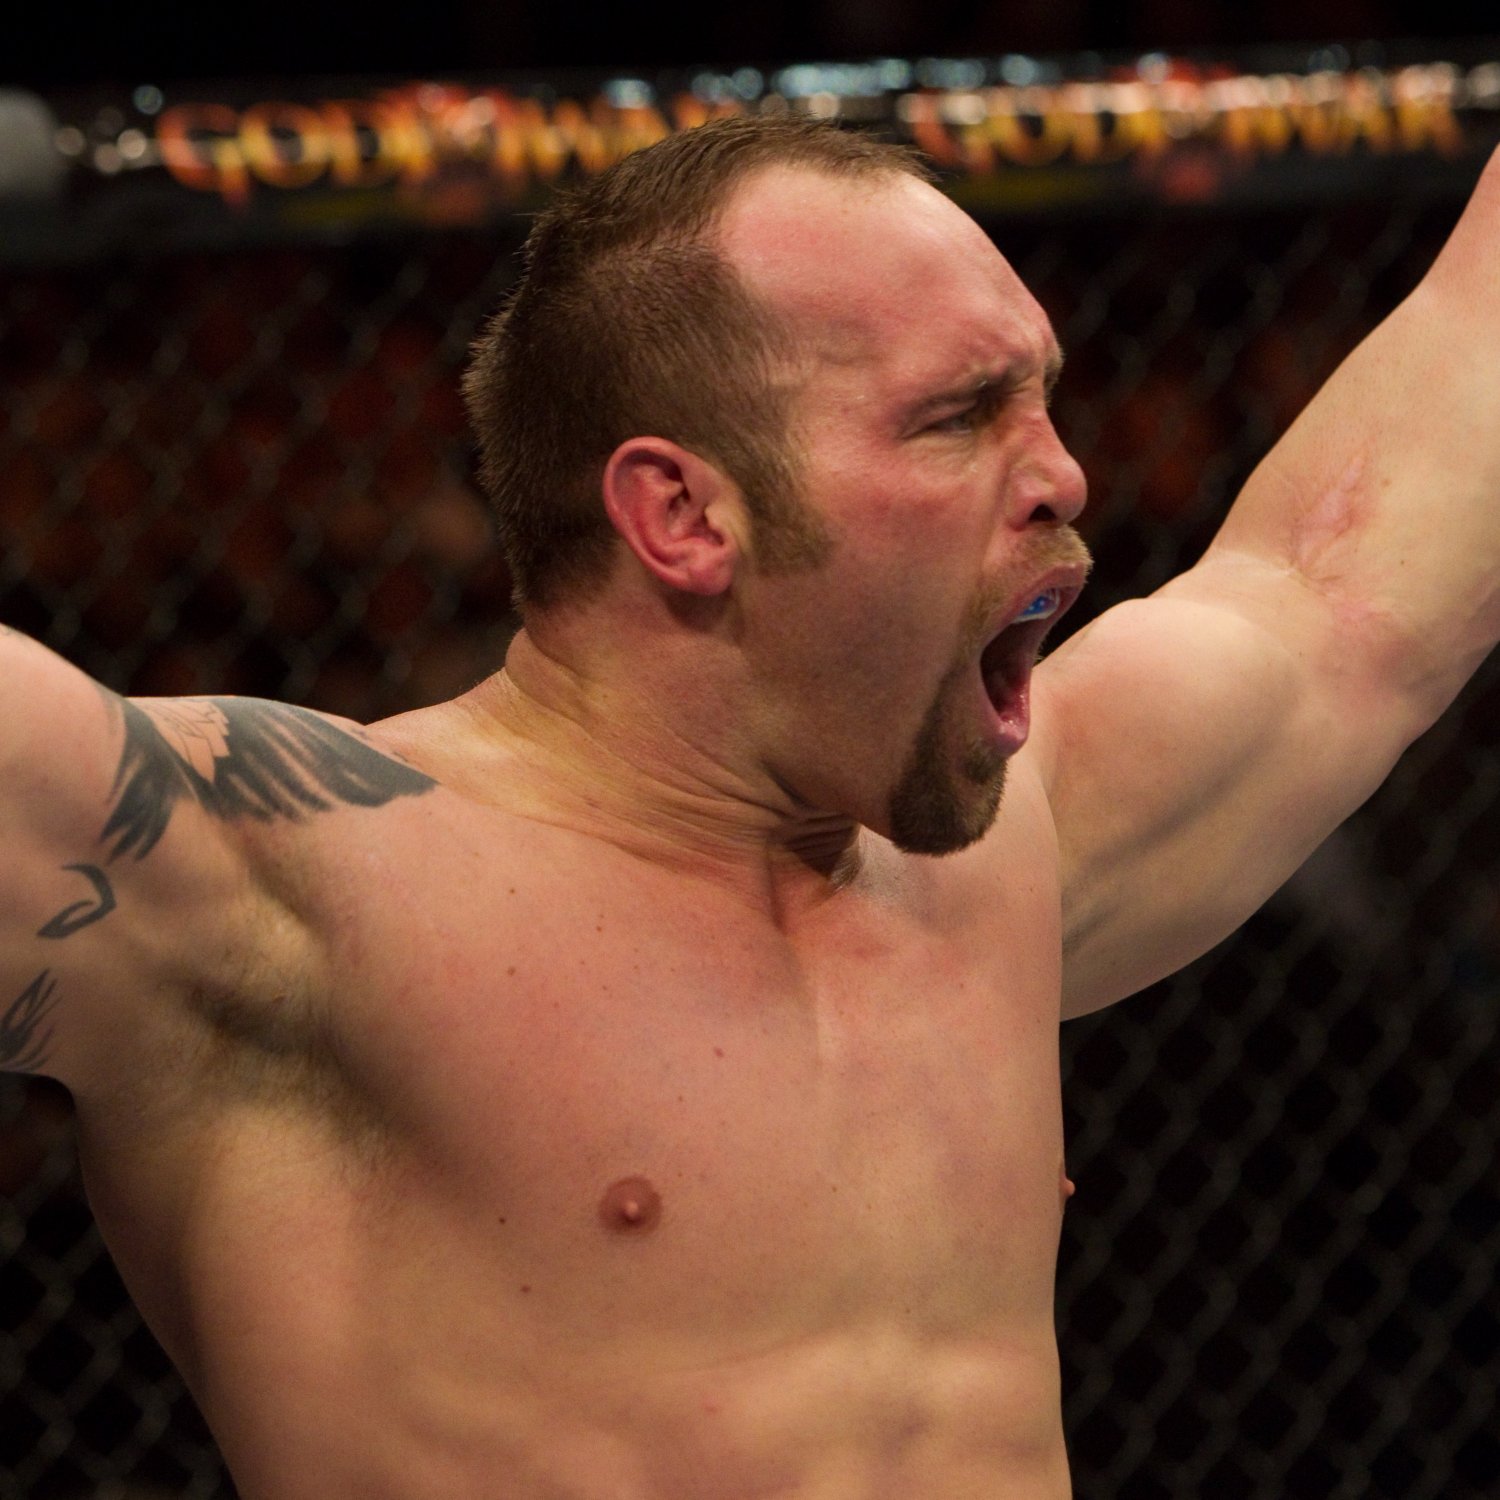 Former UFC Heavyweight Shane Carwin to Fight with 1 Hand Tied Behind Back